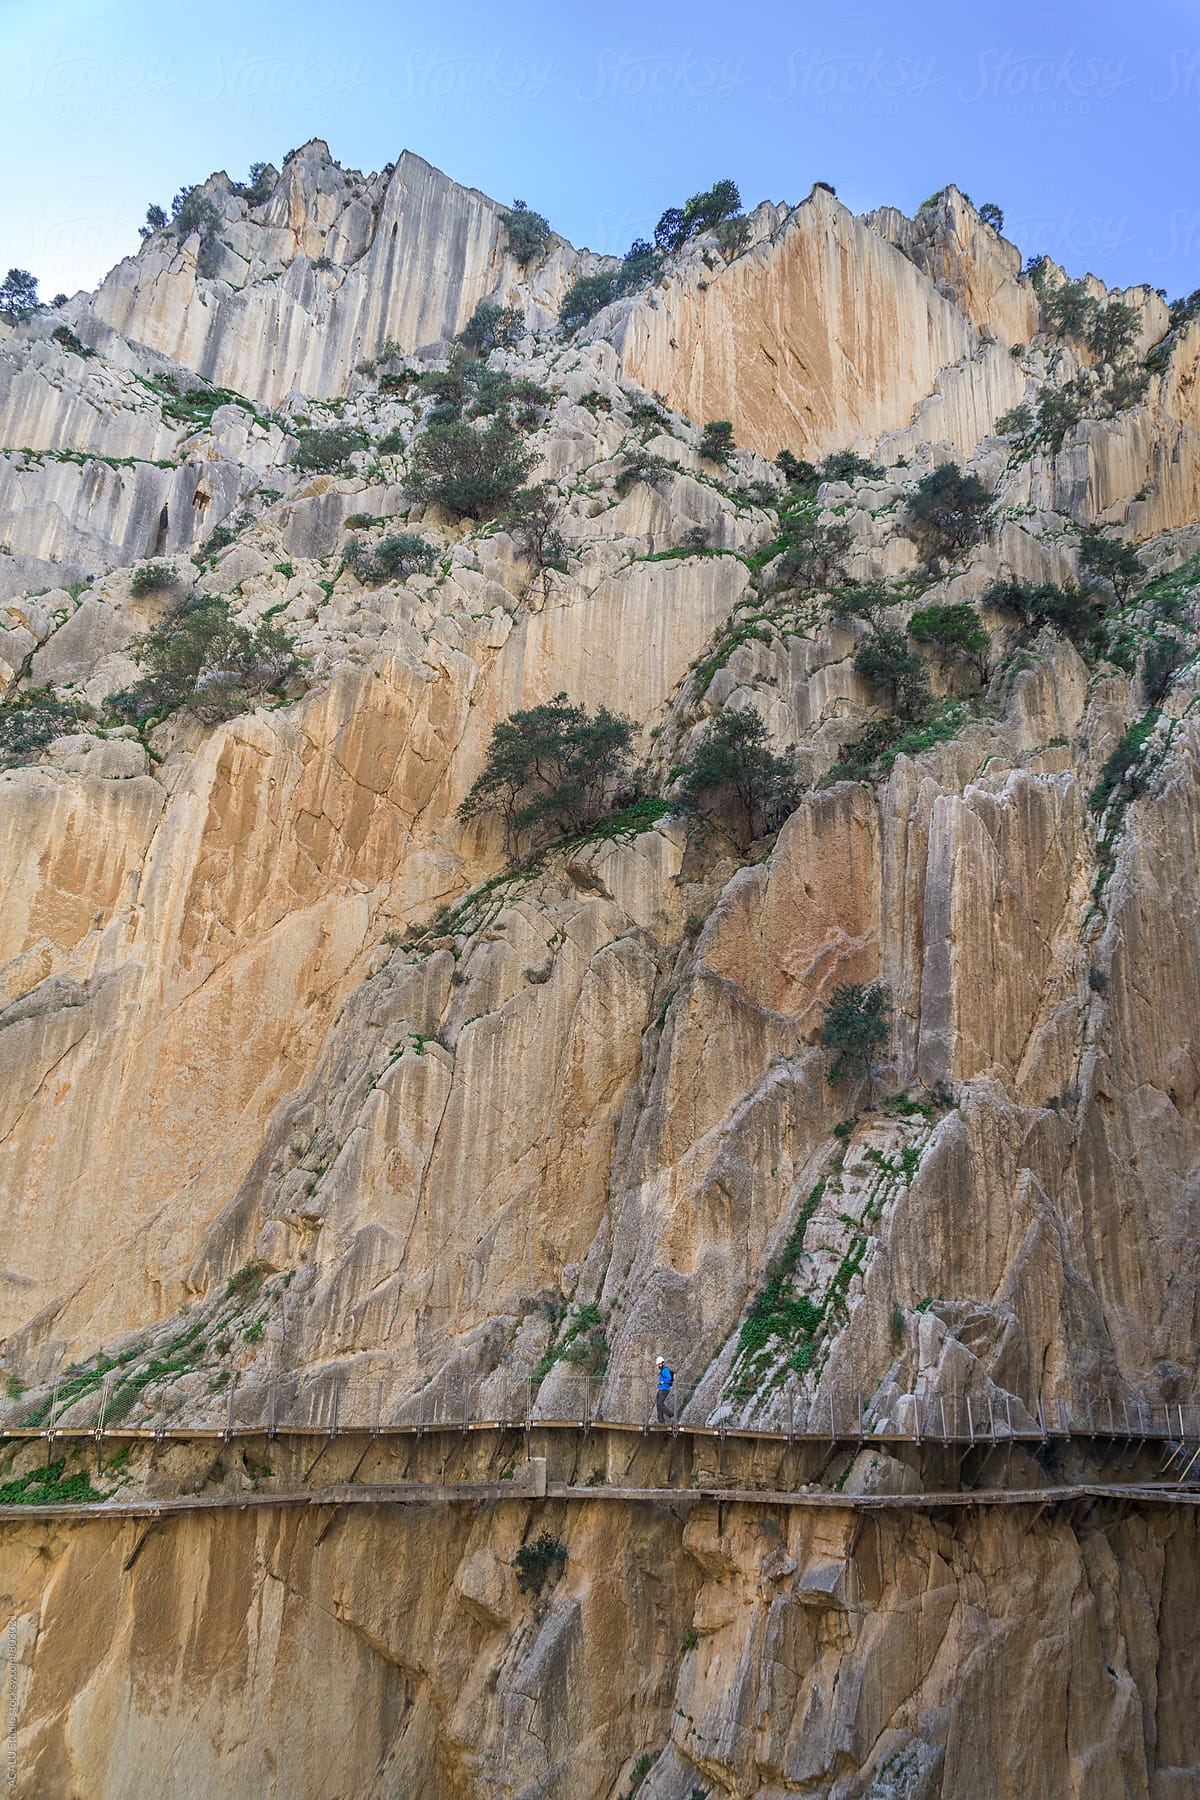 Climber walking on wooden walkway at the edge of a cliff in Caminito del Rey